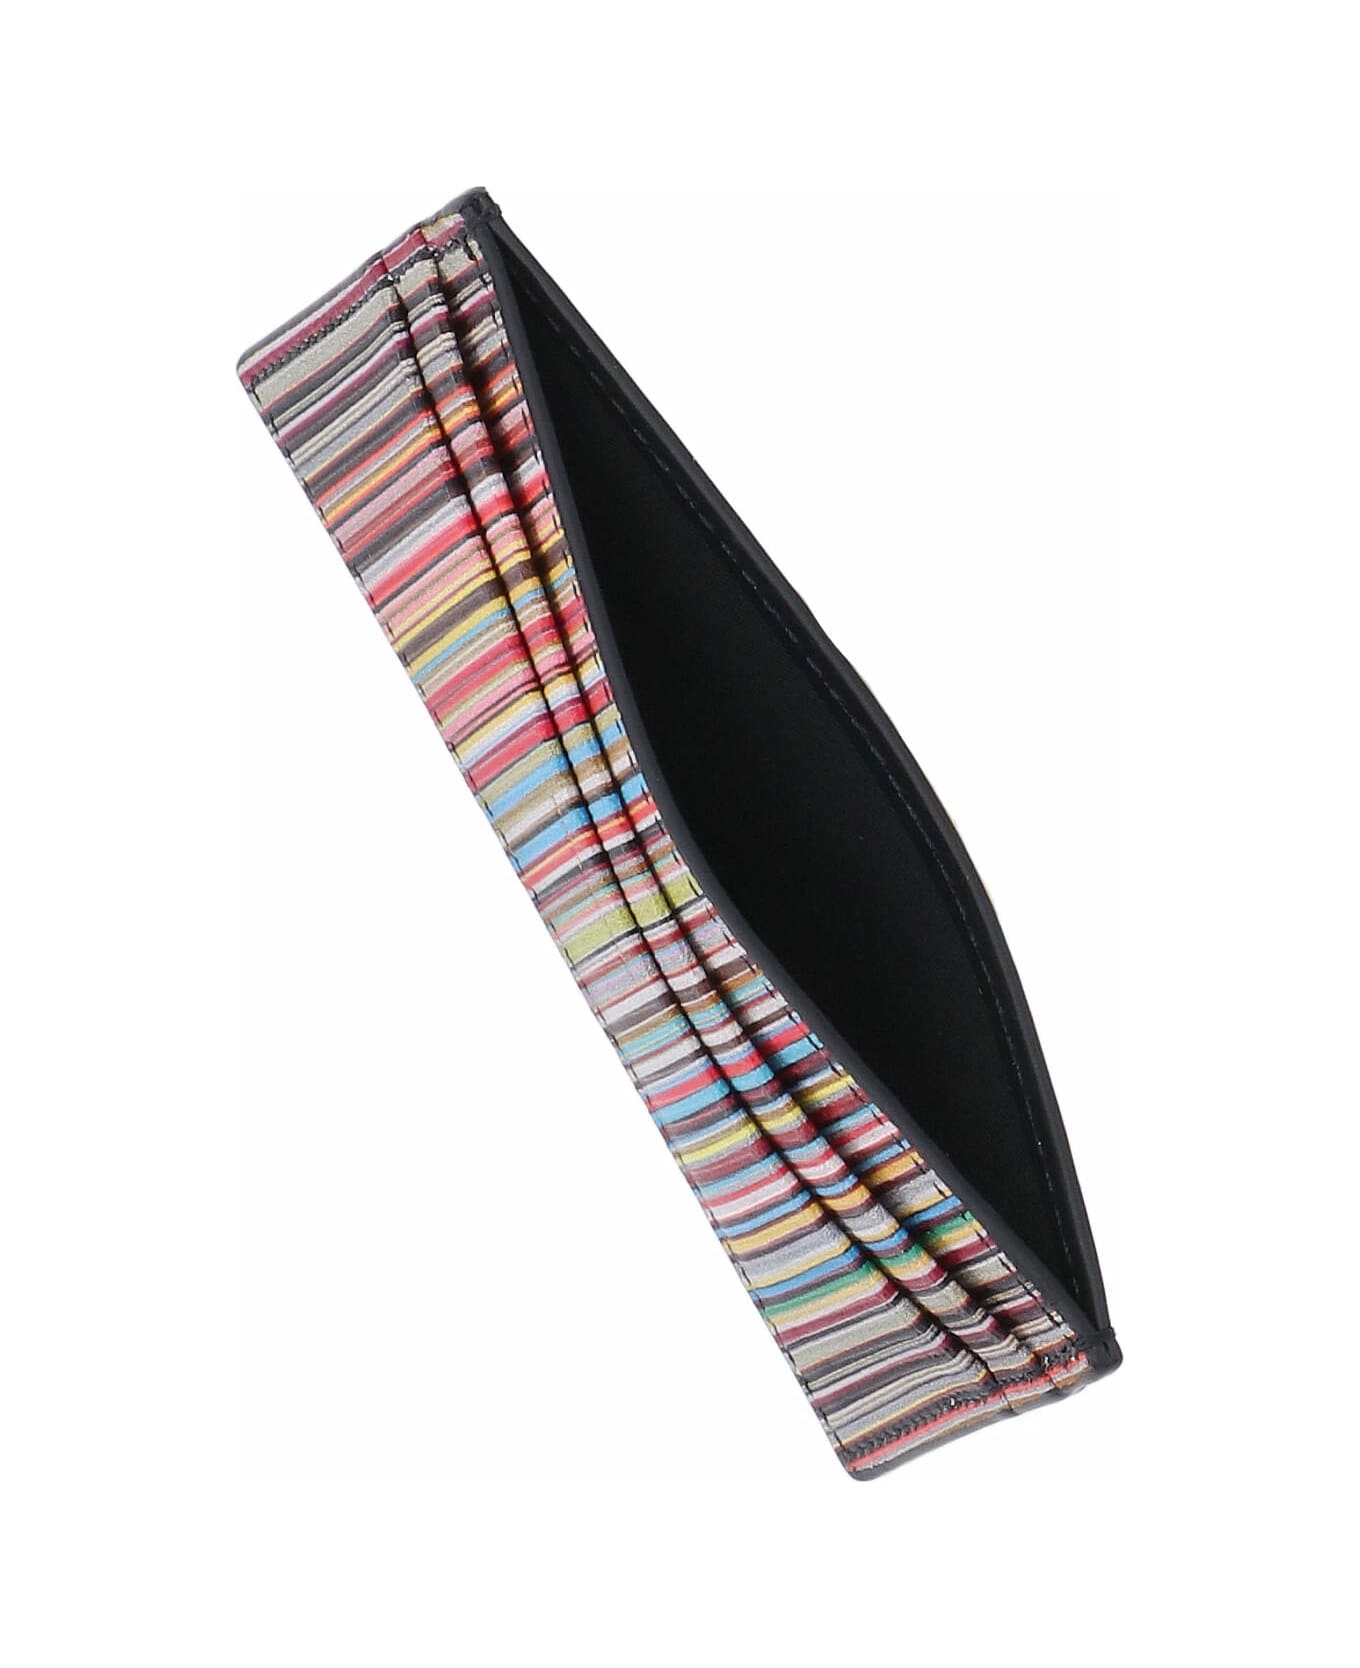 PS by Paul Smith 'signature Stripe' Card Holder Wallet - BLACK